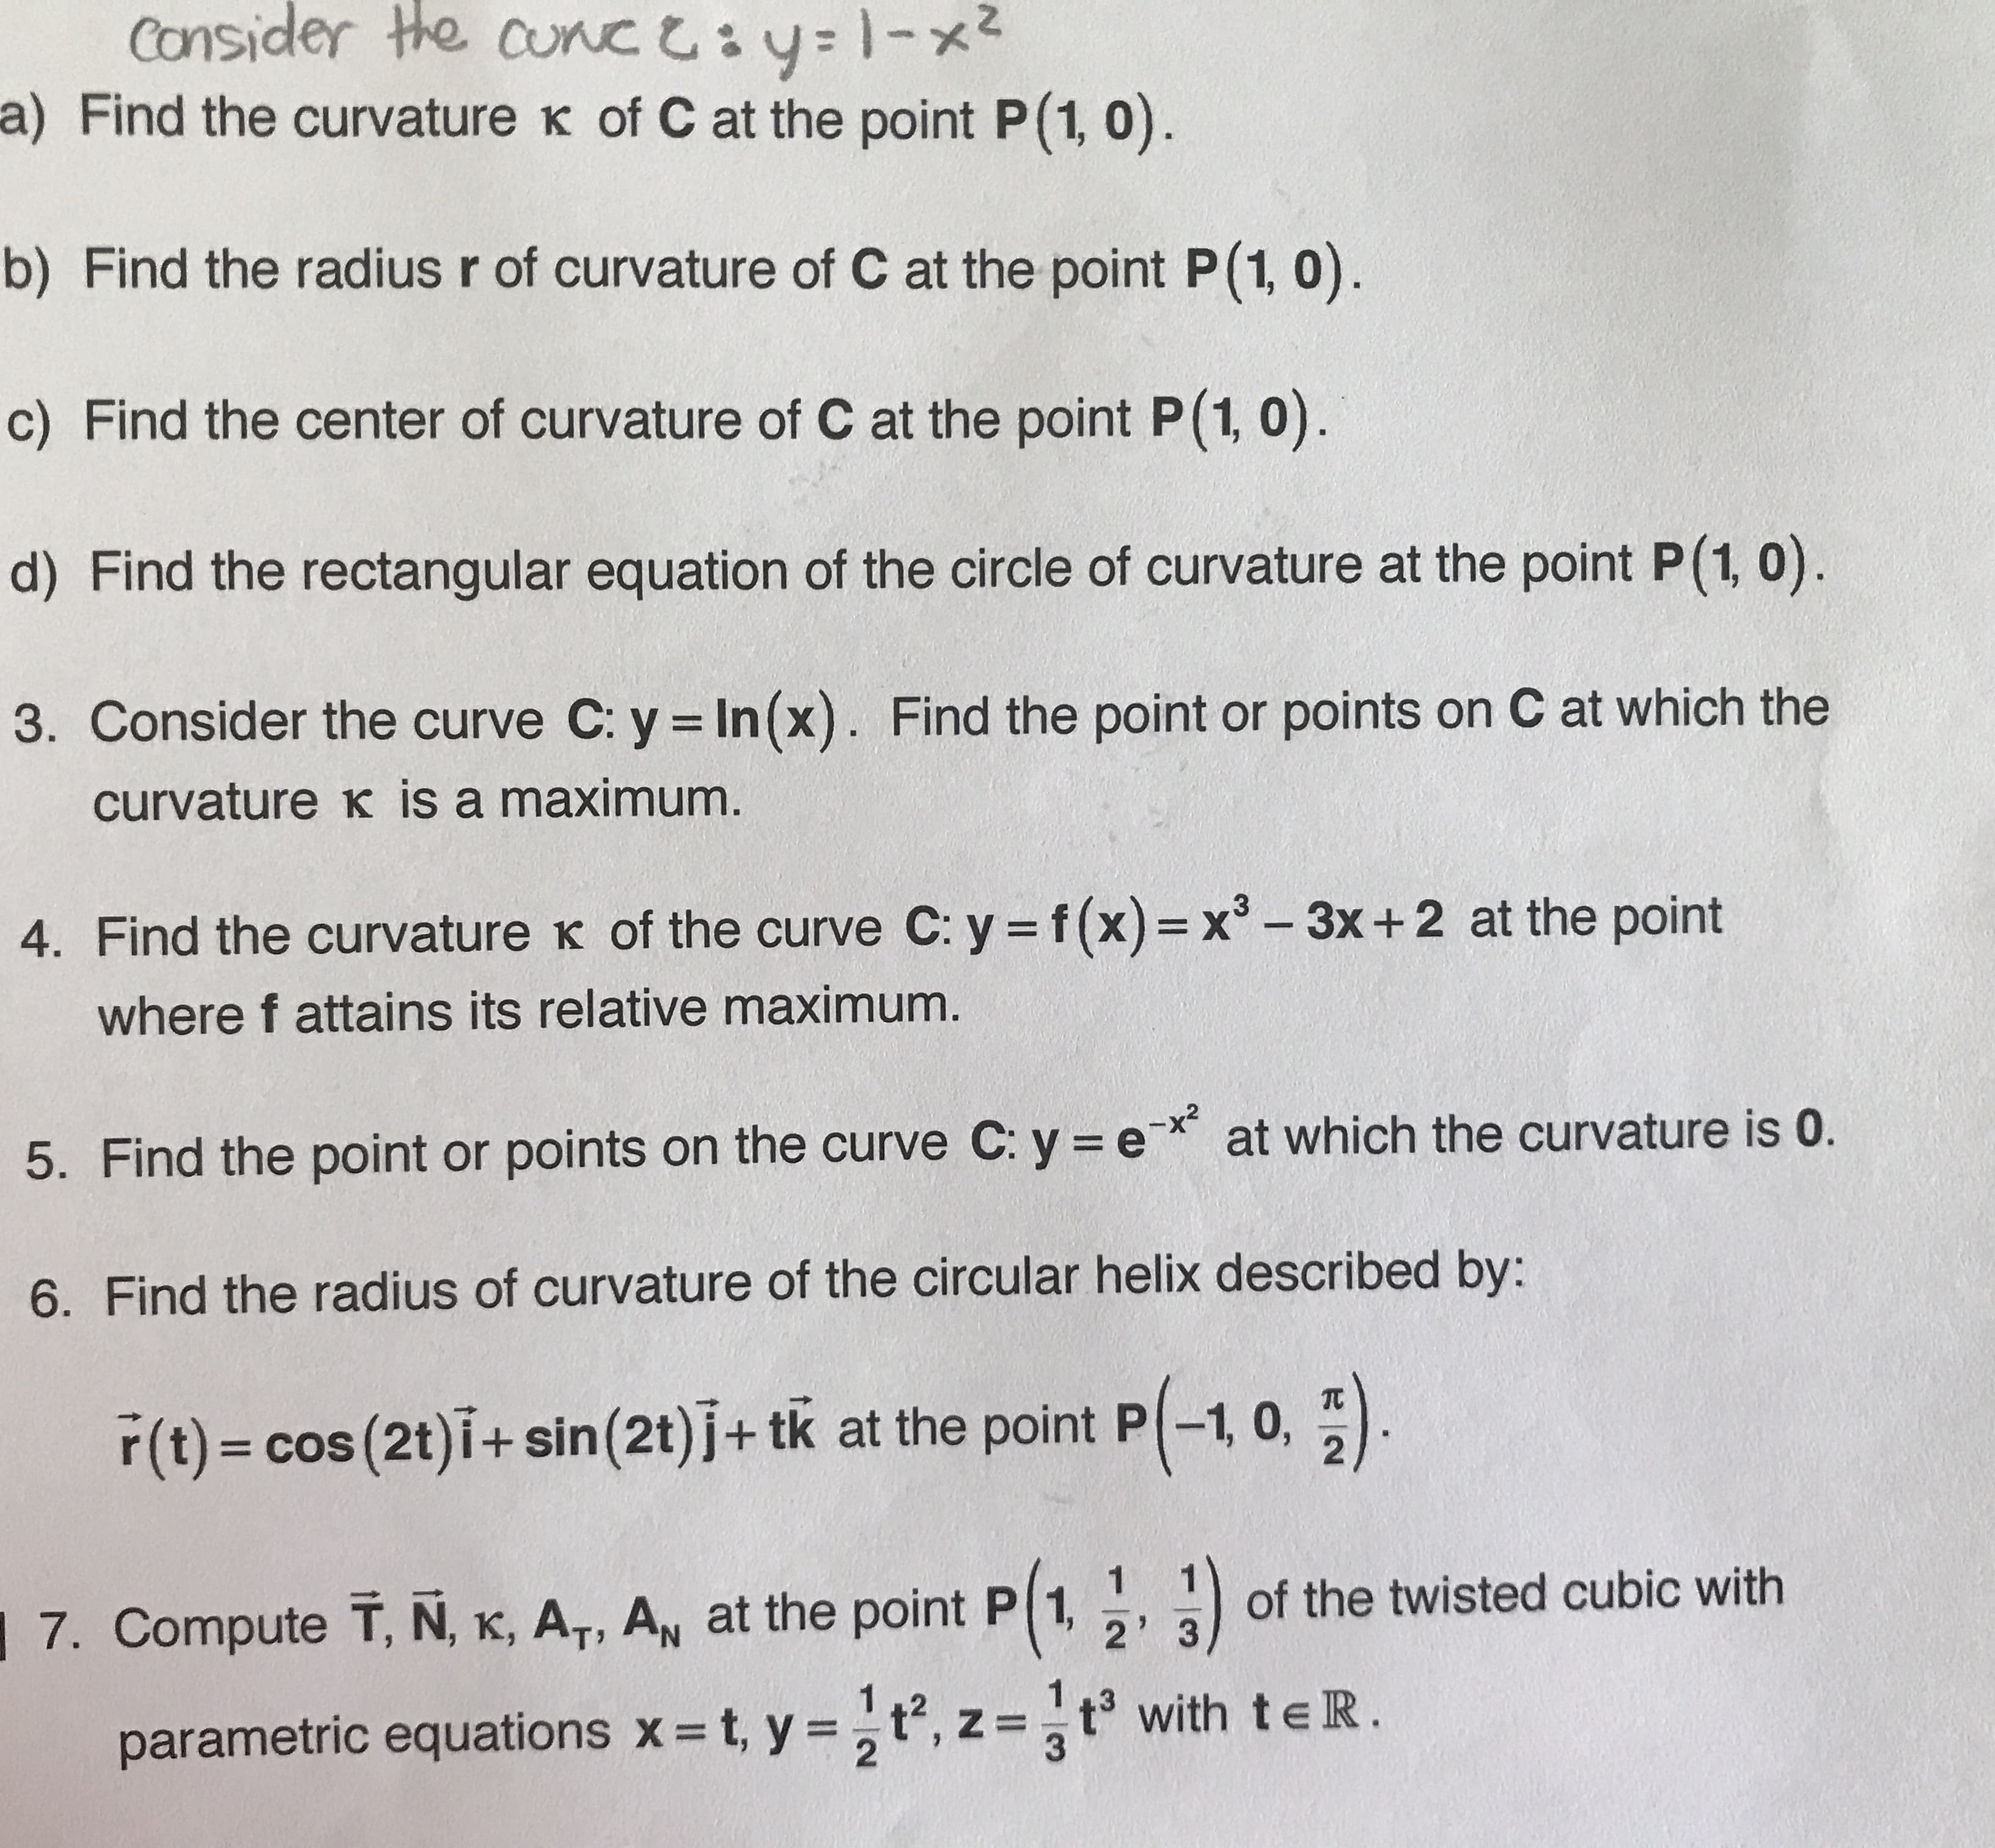 Consider the cunc y1-x
a) Find the curvature K of C at the point P(1, 0)
b) Find the radius r of curvature of C at the point P(1, 0)
c) Find the center of curvature of C at the point P(1, 0)
d) Find the rectangular equation of the circle of curvature at the point P(1, 0)
3. Consider the curve C: y In(x). Find the point or points on C at which the
curvature K is a maximum
4. Find the curvature K of the curve C: y f(x) = x -3x+2 at the point
where f attains its relative maximum.
at which the curvature is 0.
5. Find the point or points on the curve C: y e
6. Find the radius of curvature of the circular helix described by:
r(t) cos (2t)i+ sin (2t) j+ tk at the point P-1, 0,
of the twisted cubic with
7. Compute T, N, K, AT, AN at the point P 1,
2' 3
1.2
t, y=t, z =t3 with teR.
parametric equations x
2
